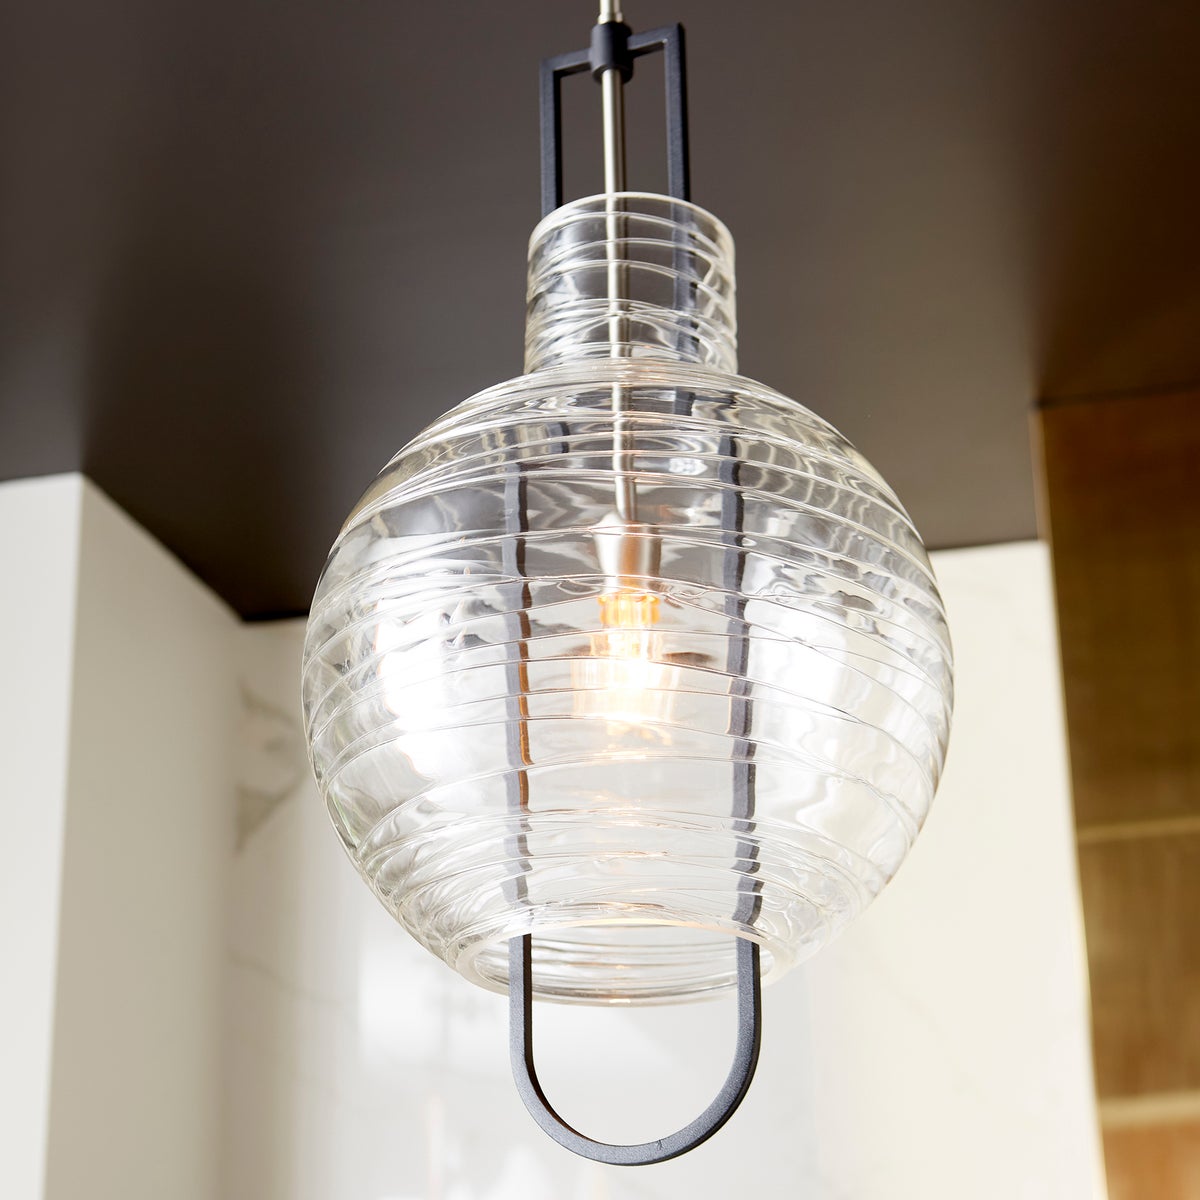 Globe pendant light fixture with blown clear textured glass shade and noir/satin nickel finishes. Dual chain and stem hanging system for adjustable height. Enhance your space with this contemporary-chic lighting.